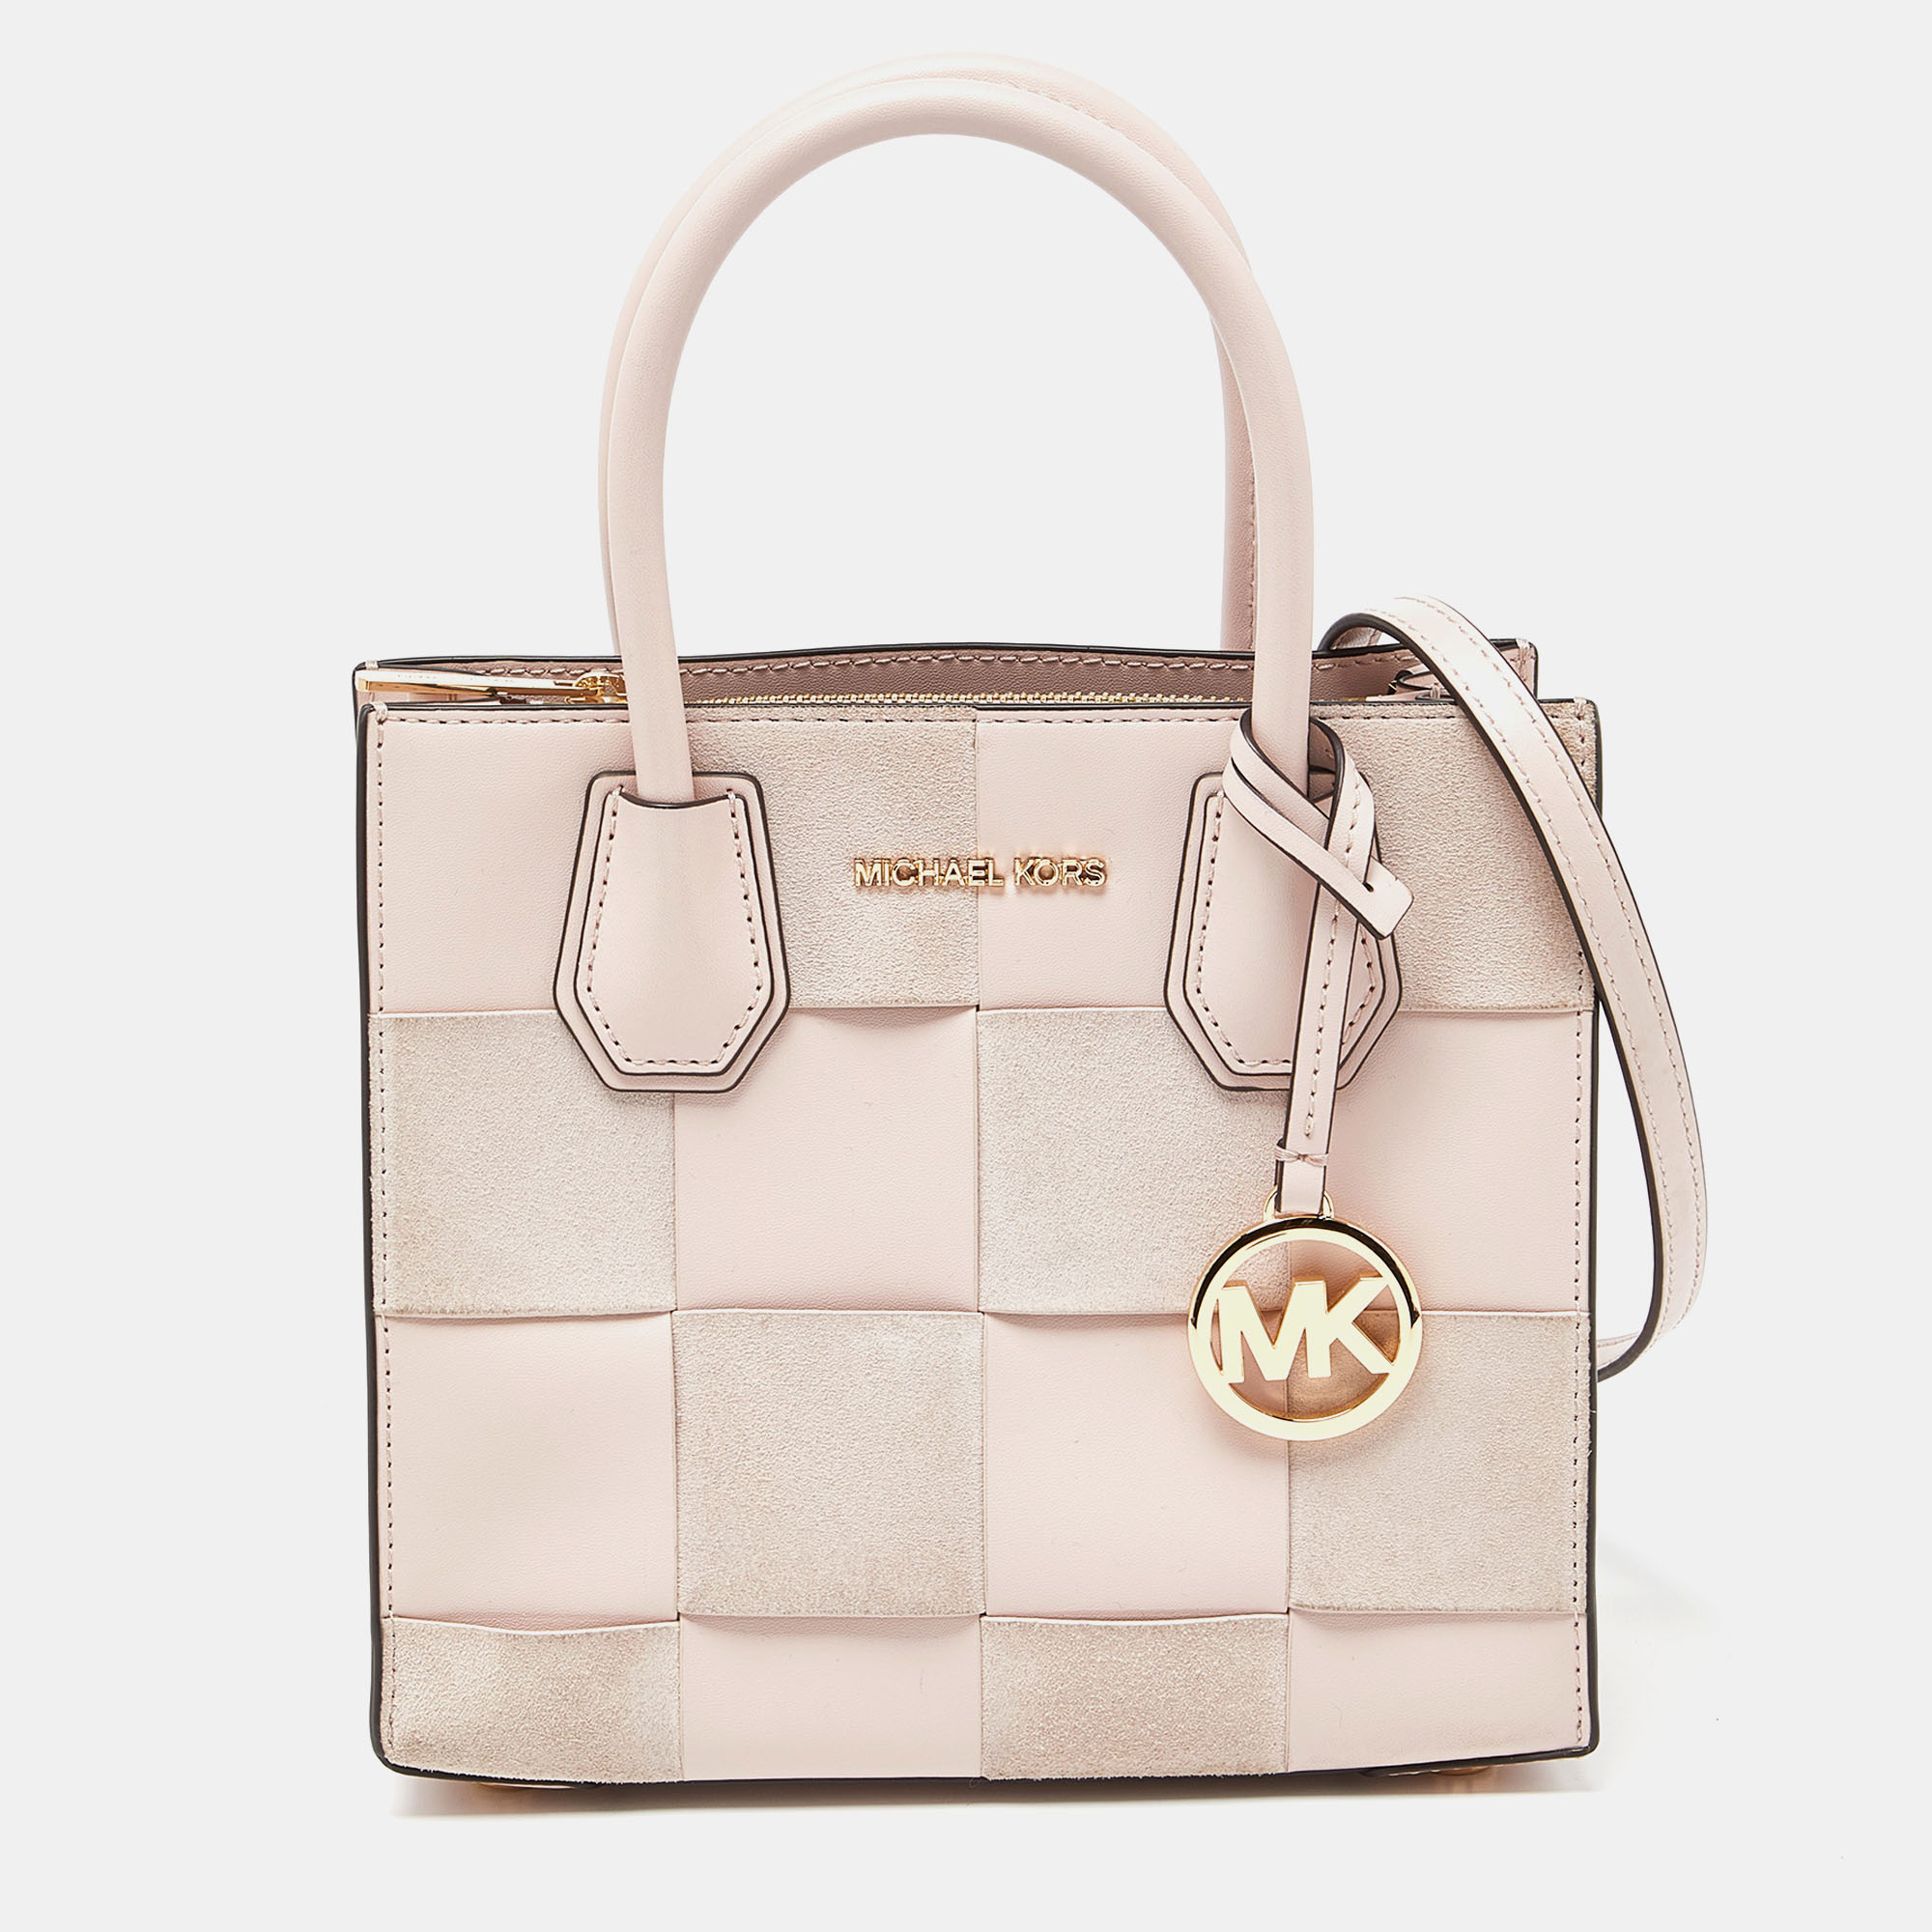 michael kors light pink leather and suede mercer tote